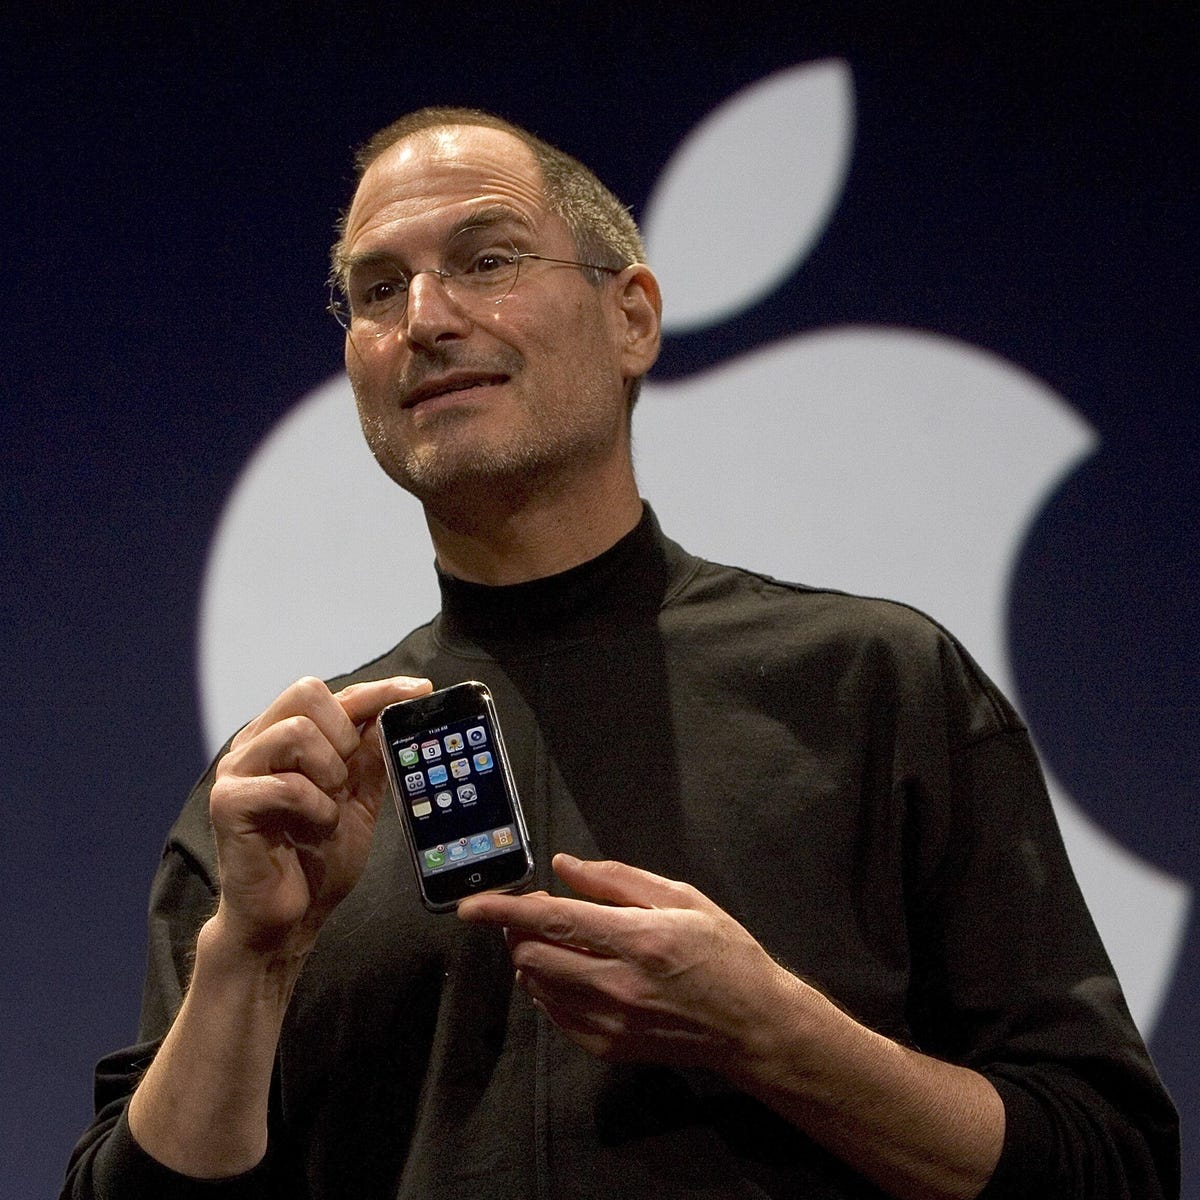 Steve Jobs Knew iPhone Would Be Iconic. More Than 2 Billion Phones Later,  He Was Right - CNET